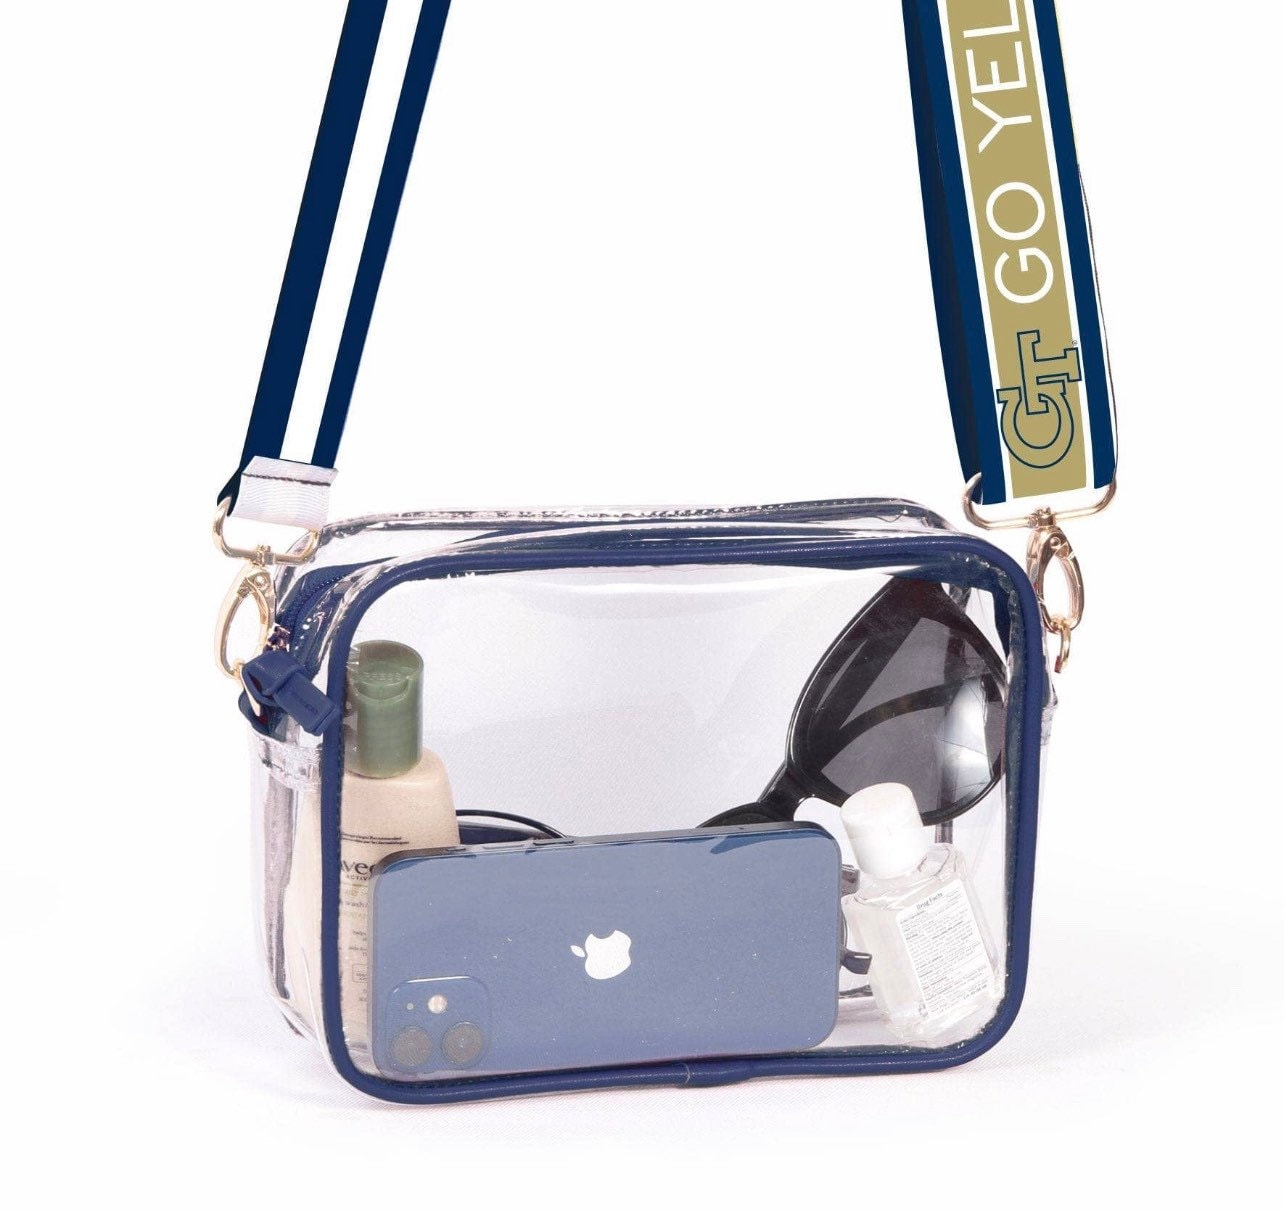 Take Me Out to the Ball Game Clear Crossbody Stadium Bag - Navy GG